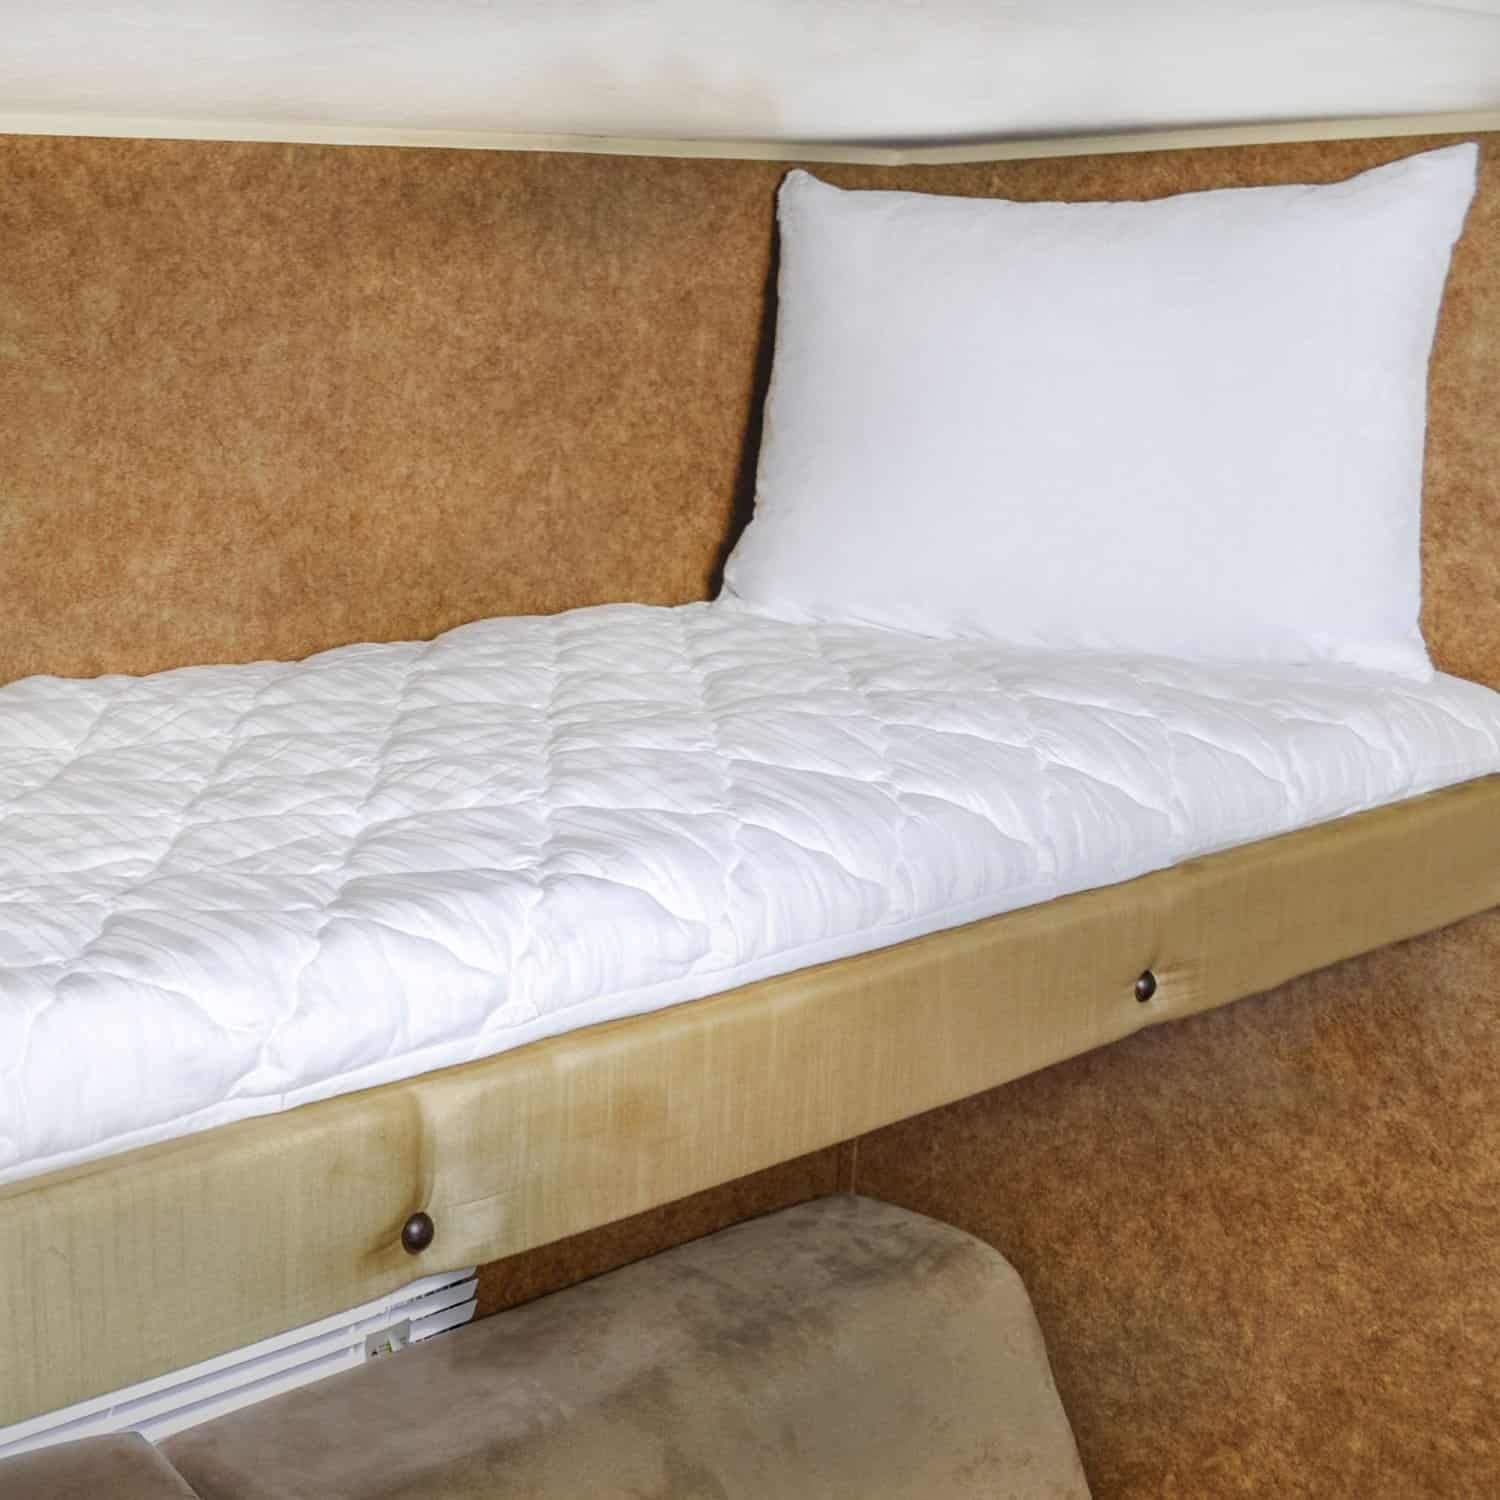 Rv Mattress Sizes Types And Places To, Narrow Bunk Bed Mattress